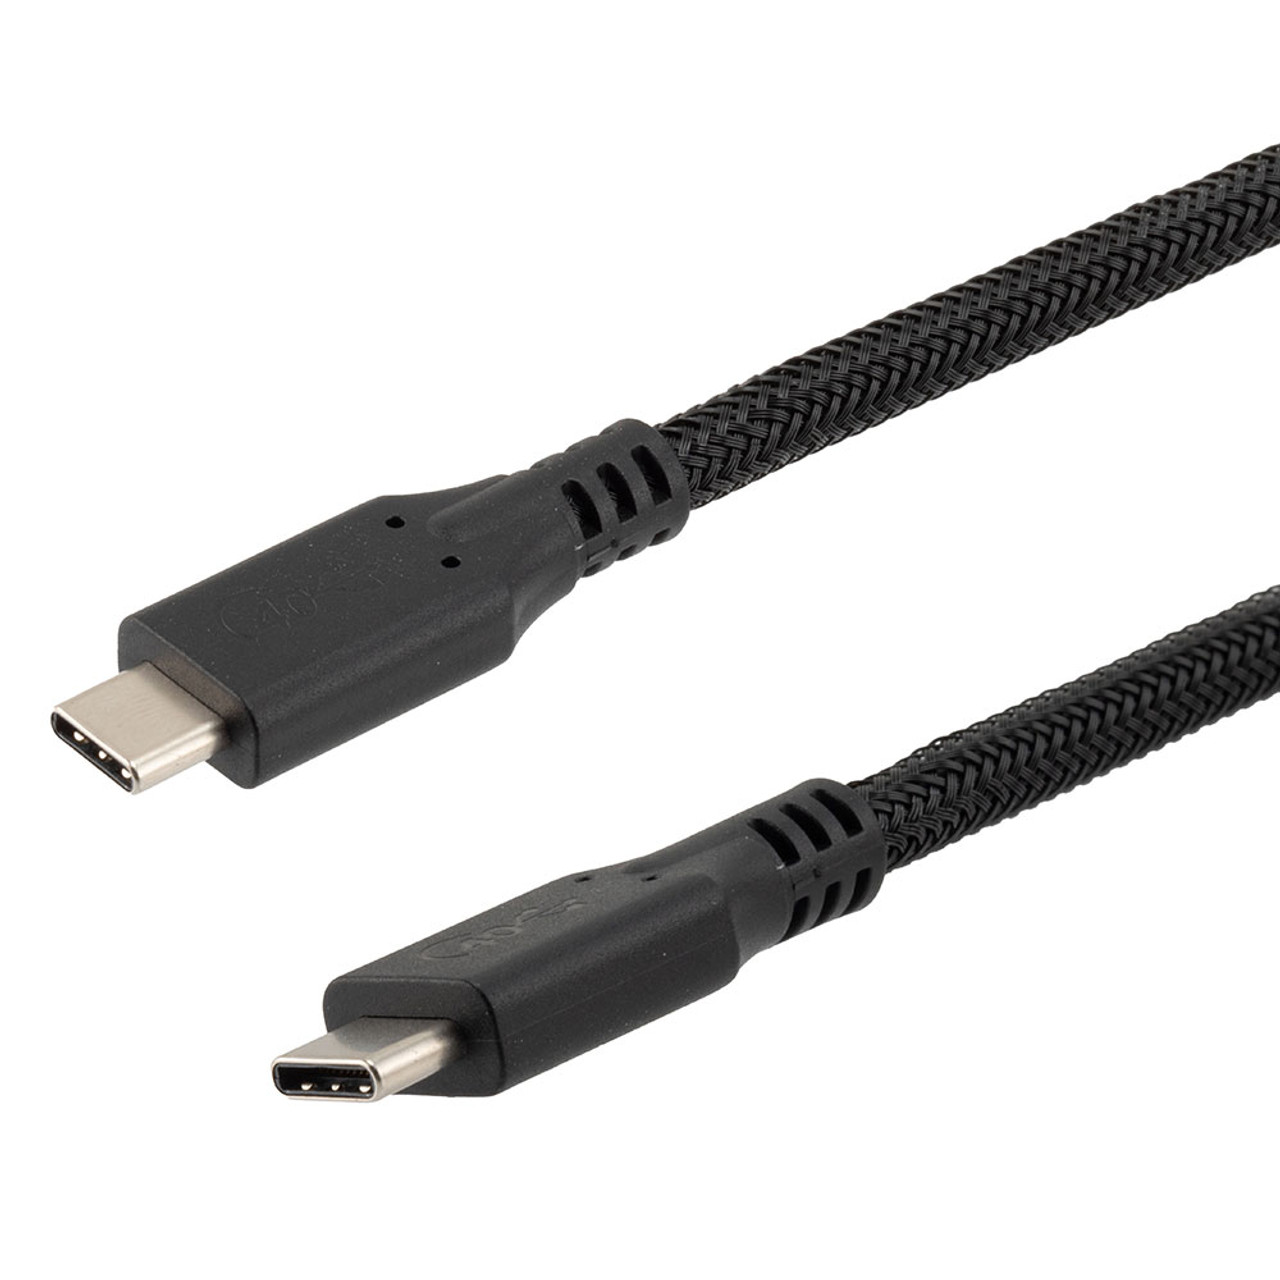 NavePoint USB C 4.0 Male to USB C 4.0 Male Cable, Molded PVC, Supports 5 Volts/100 Watts, 40 Gbps, Black Nylon Braid, 1M Length